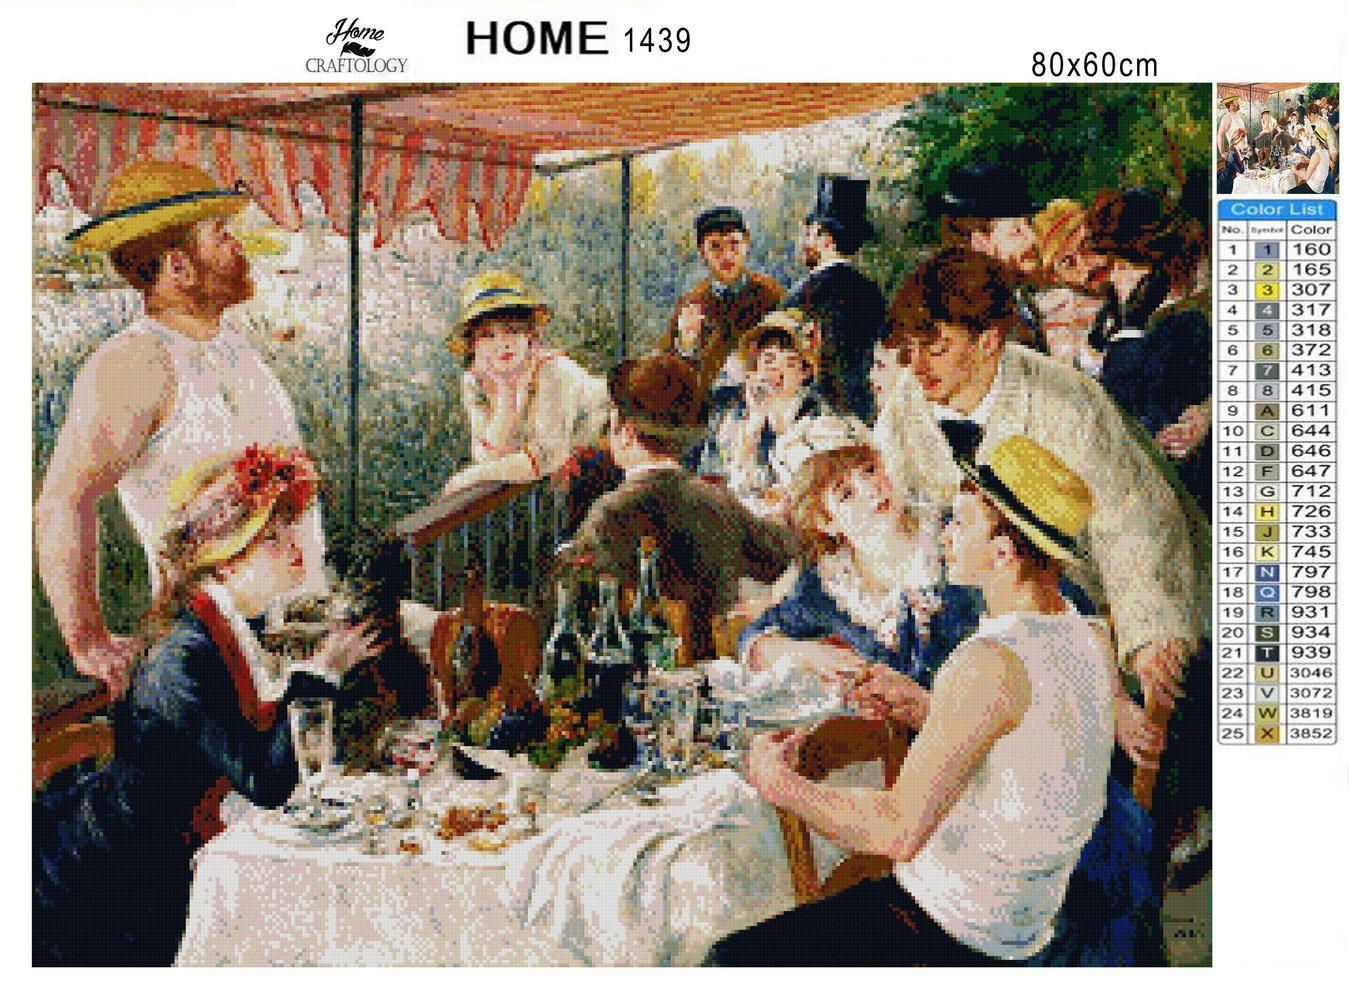 Luncheon of the Boating Party - Premium Diamond Painting Kit